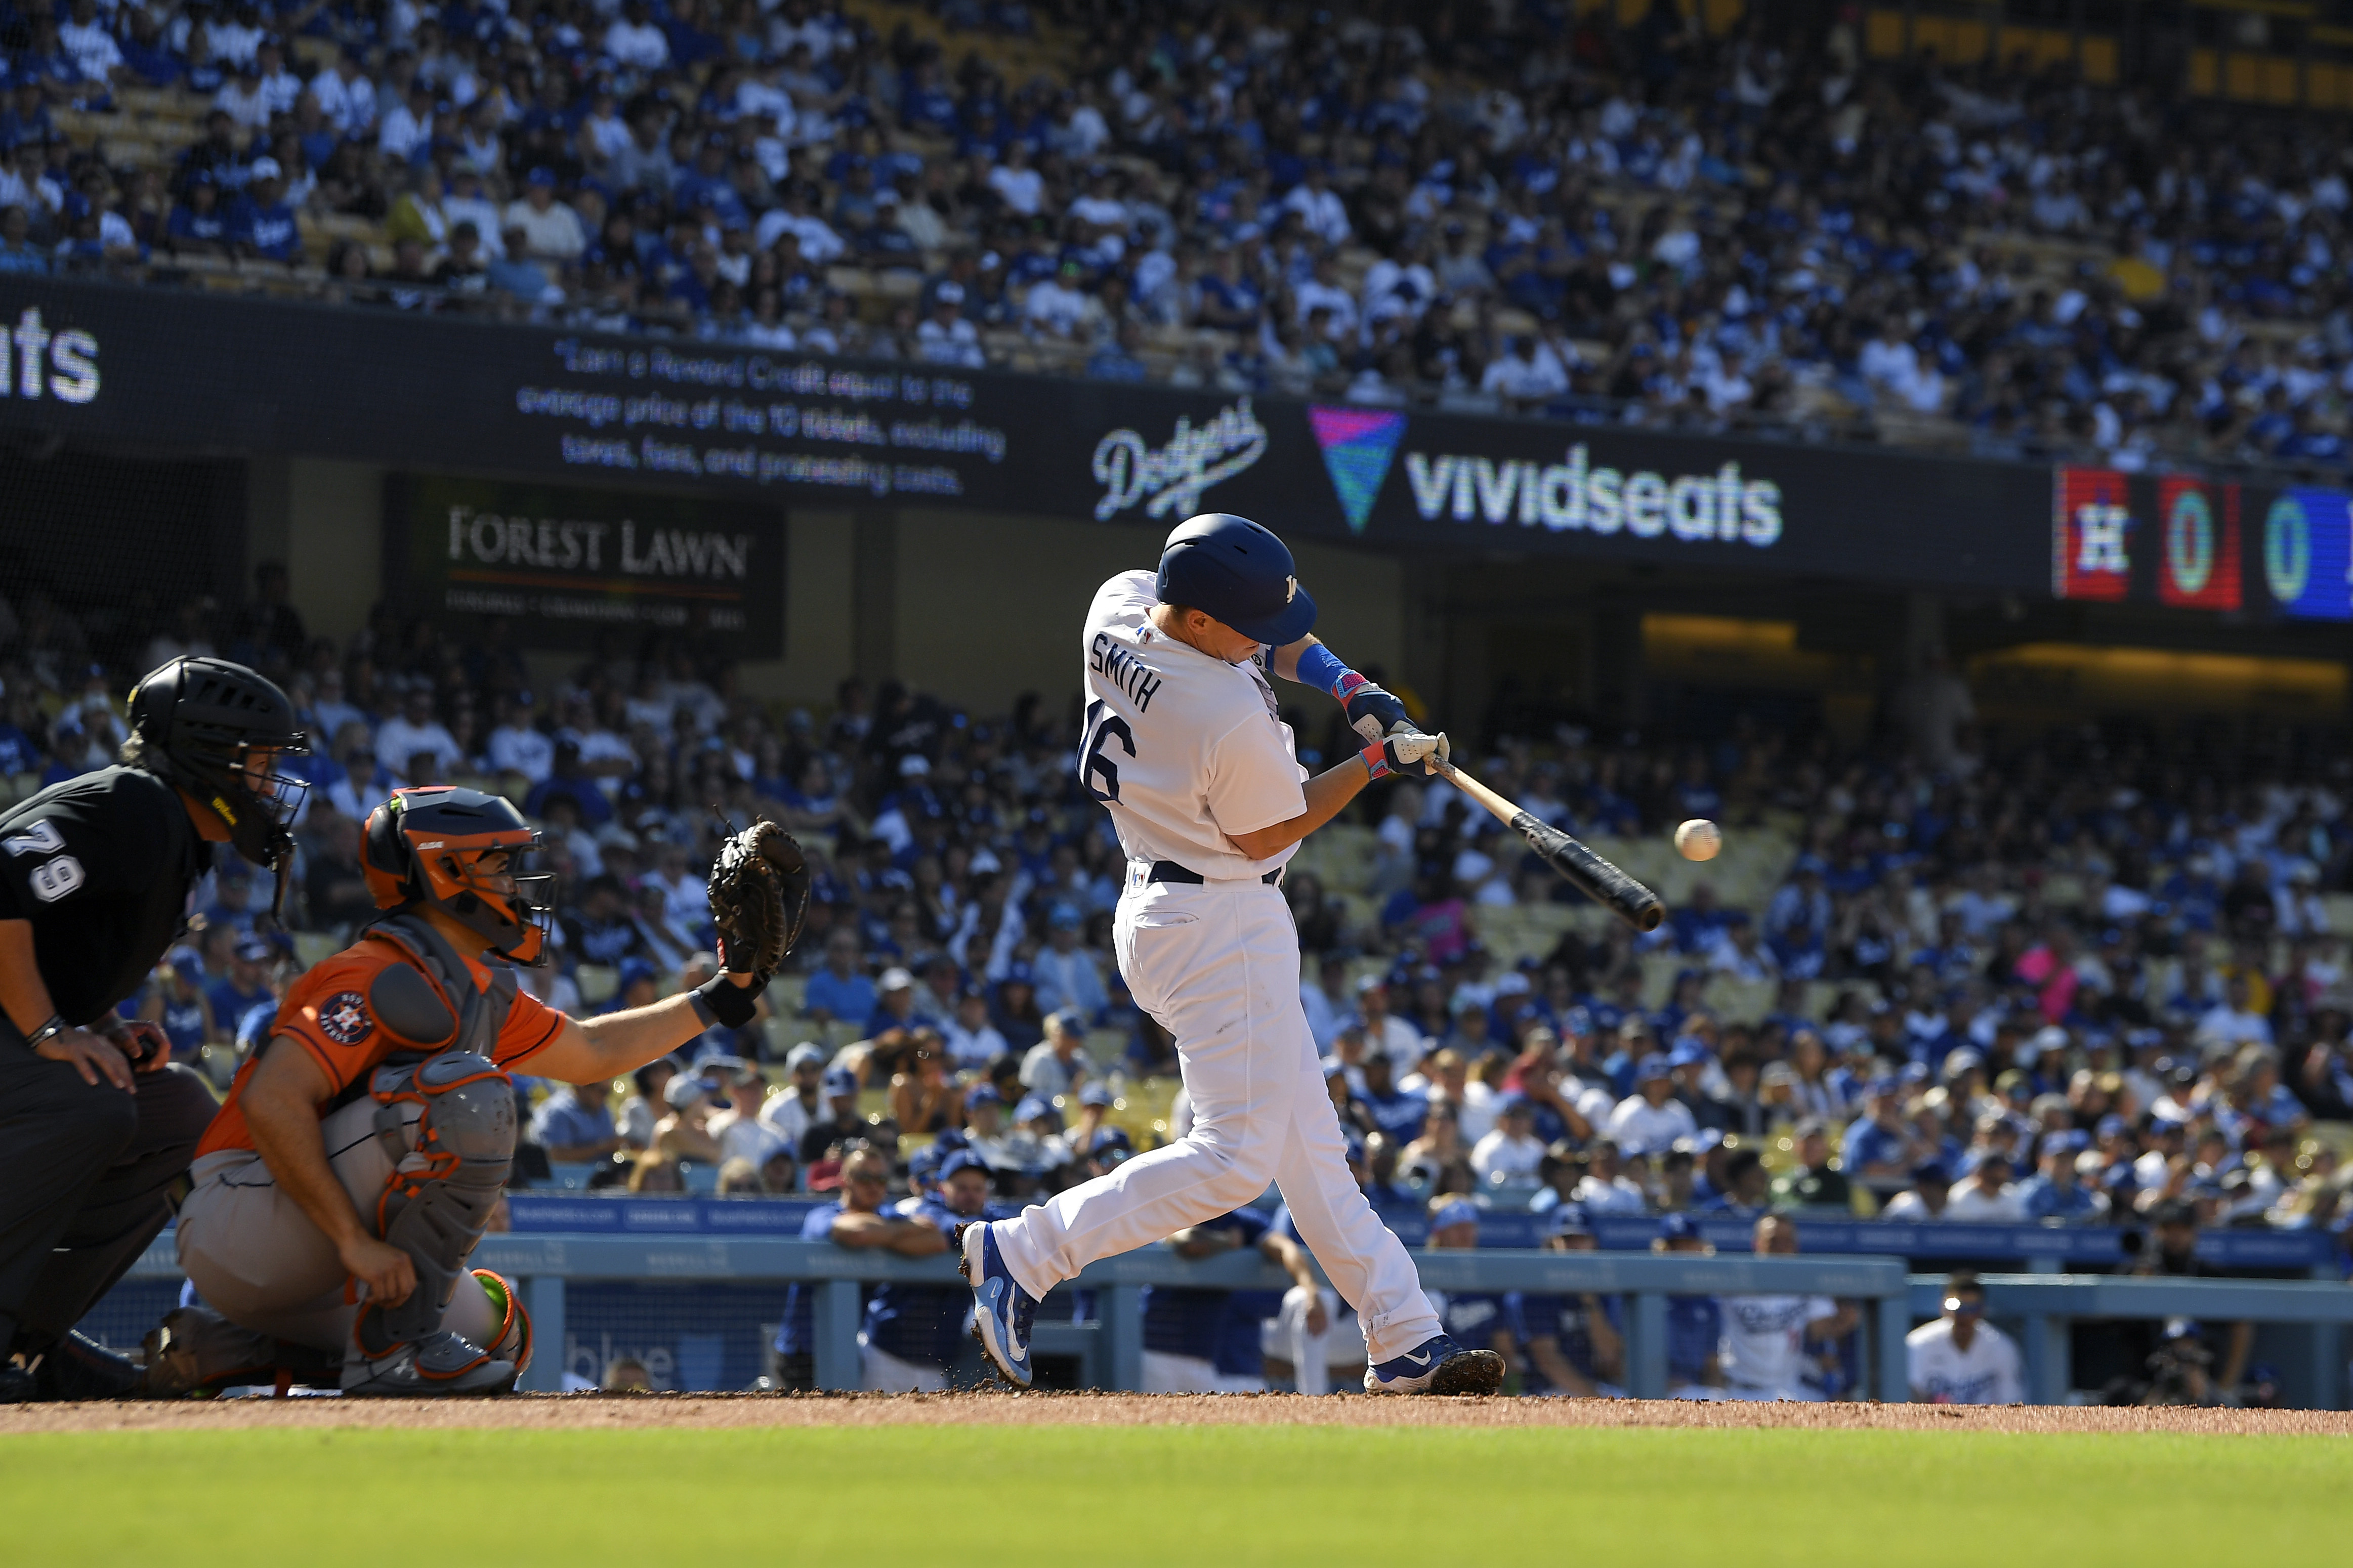 Dodgers rally to beat Astros 8-7 after Houston reliever Stanek